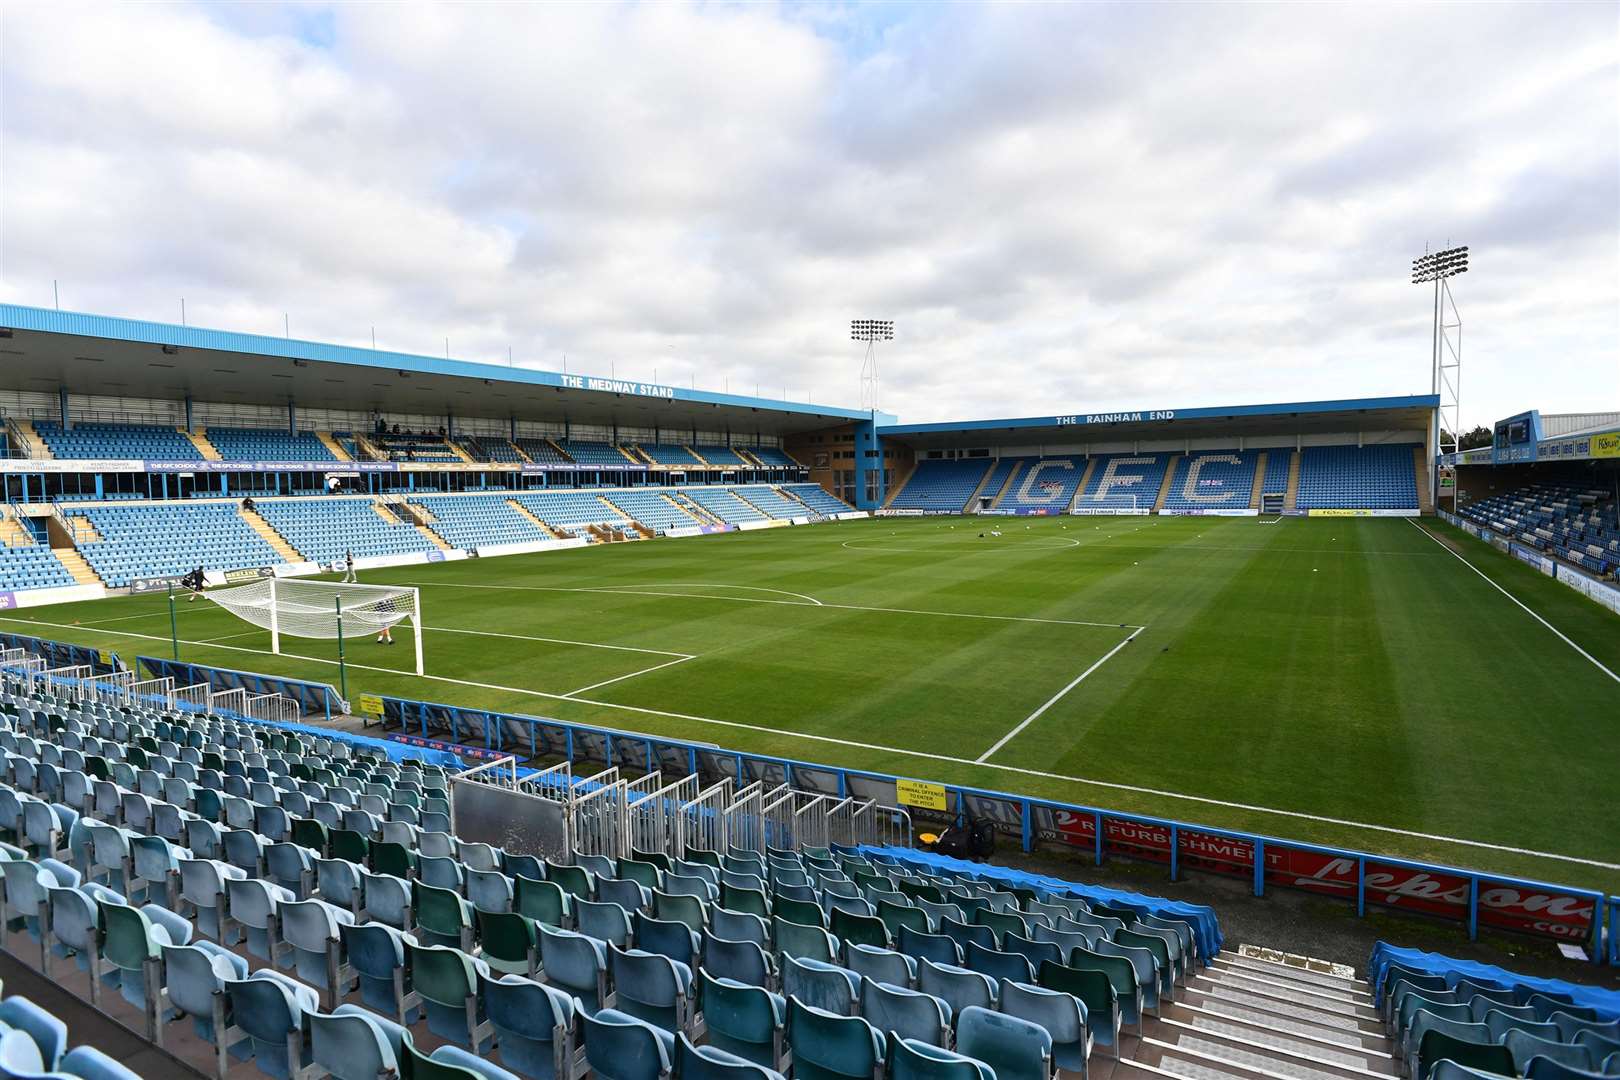 The player ran into the home stands at Priestfield Stadium Picture: Keith Gillard